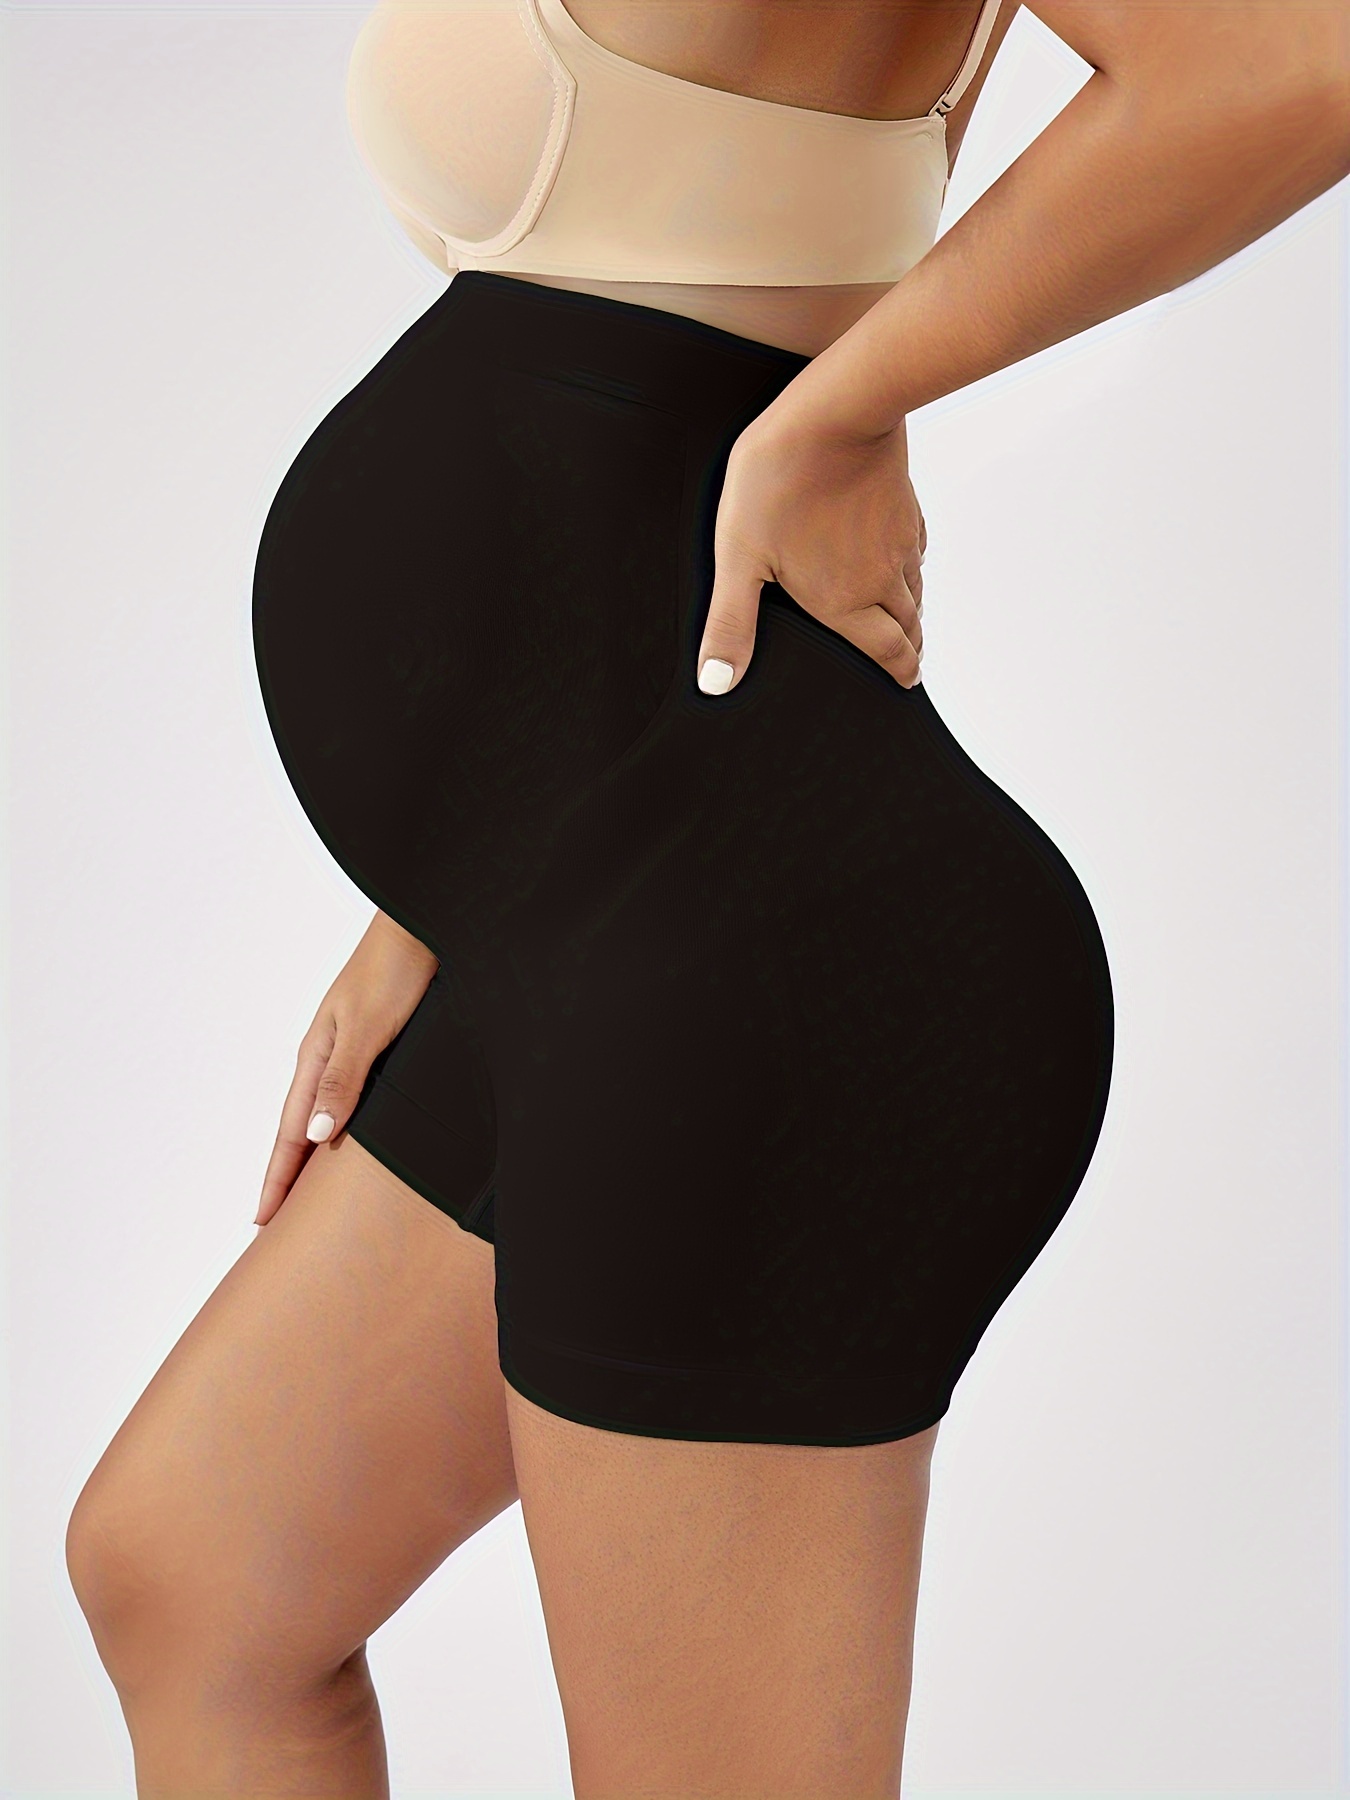 Pregnant Women's High Waist And Belly Support Underwear For Pregnancy  Maternity